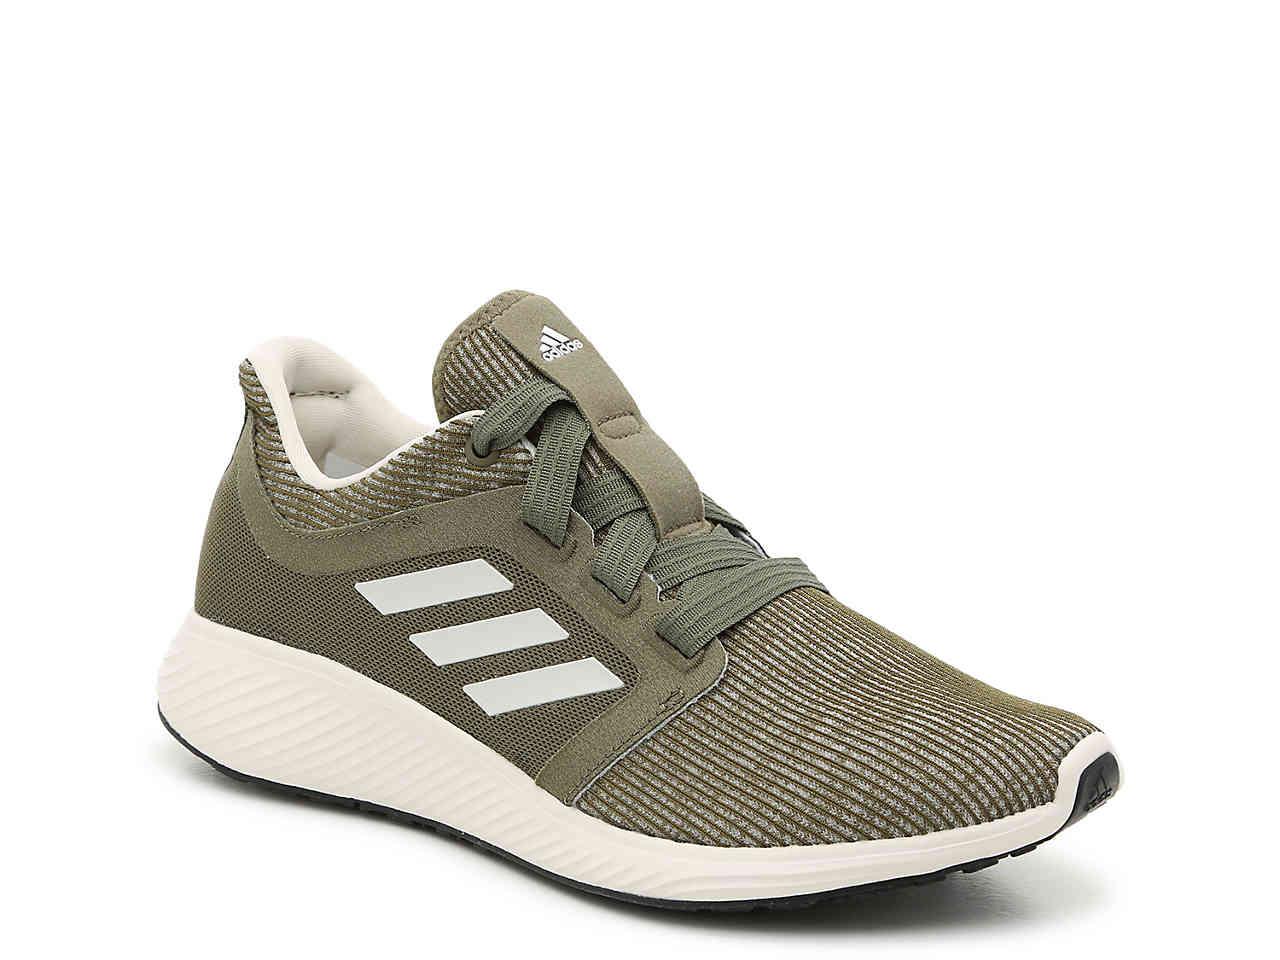 adidas Rubber Edge Lux 3 Lightweight Running Shoe in Olive Green (Green) |  Lyst